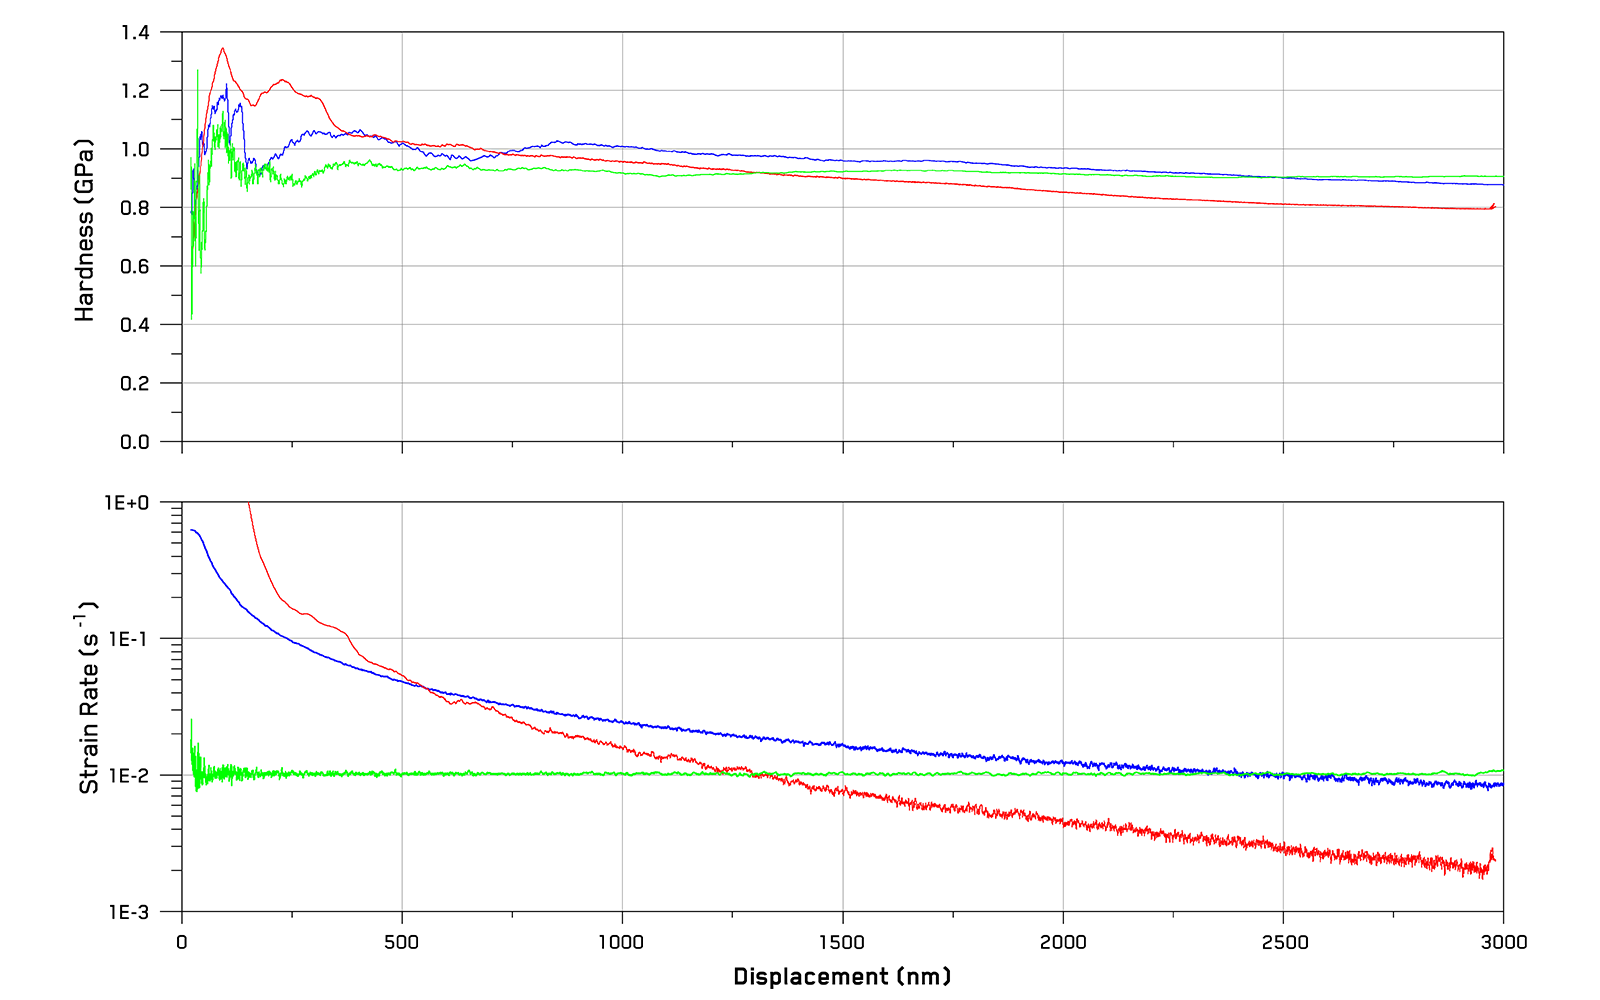 Top graph shows hardness vs. depth, bottom graph shows strain rate vs. depth in aluminum under different tests.